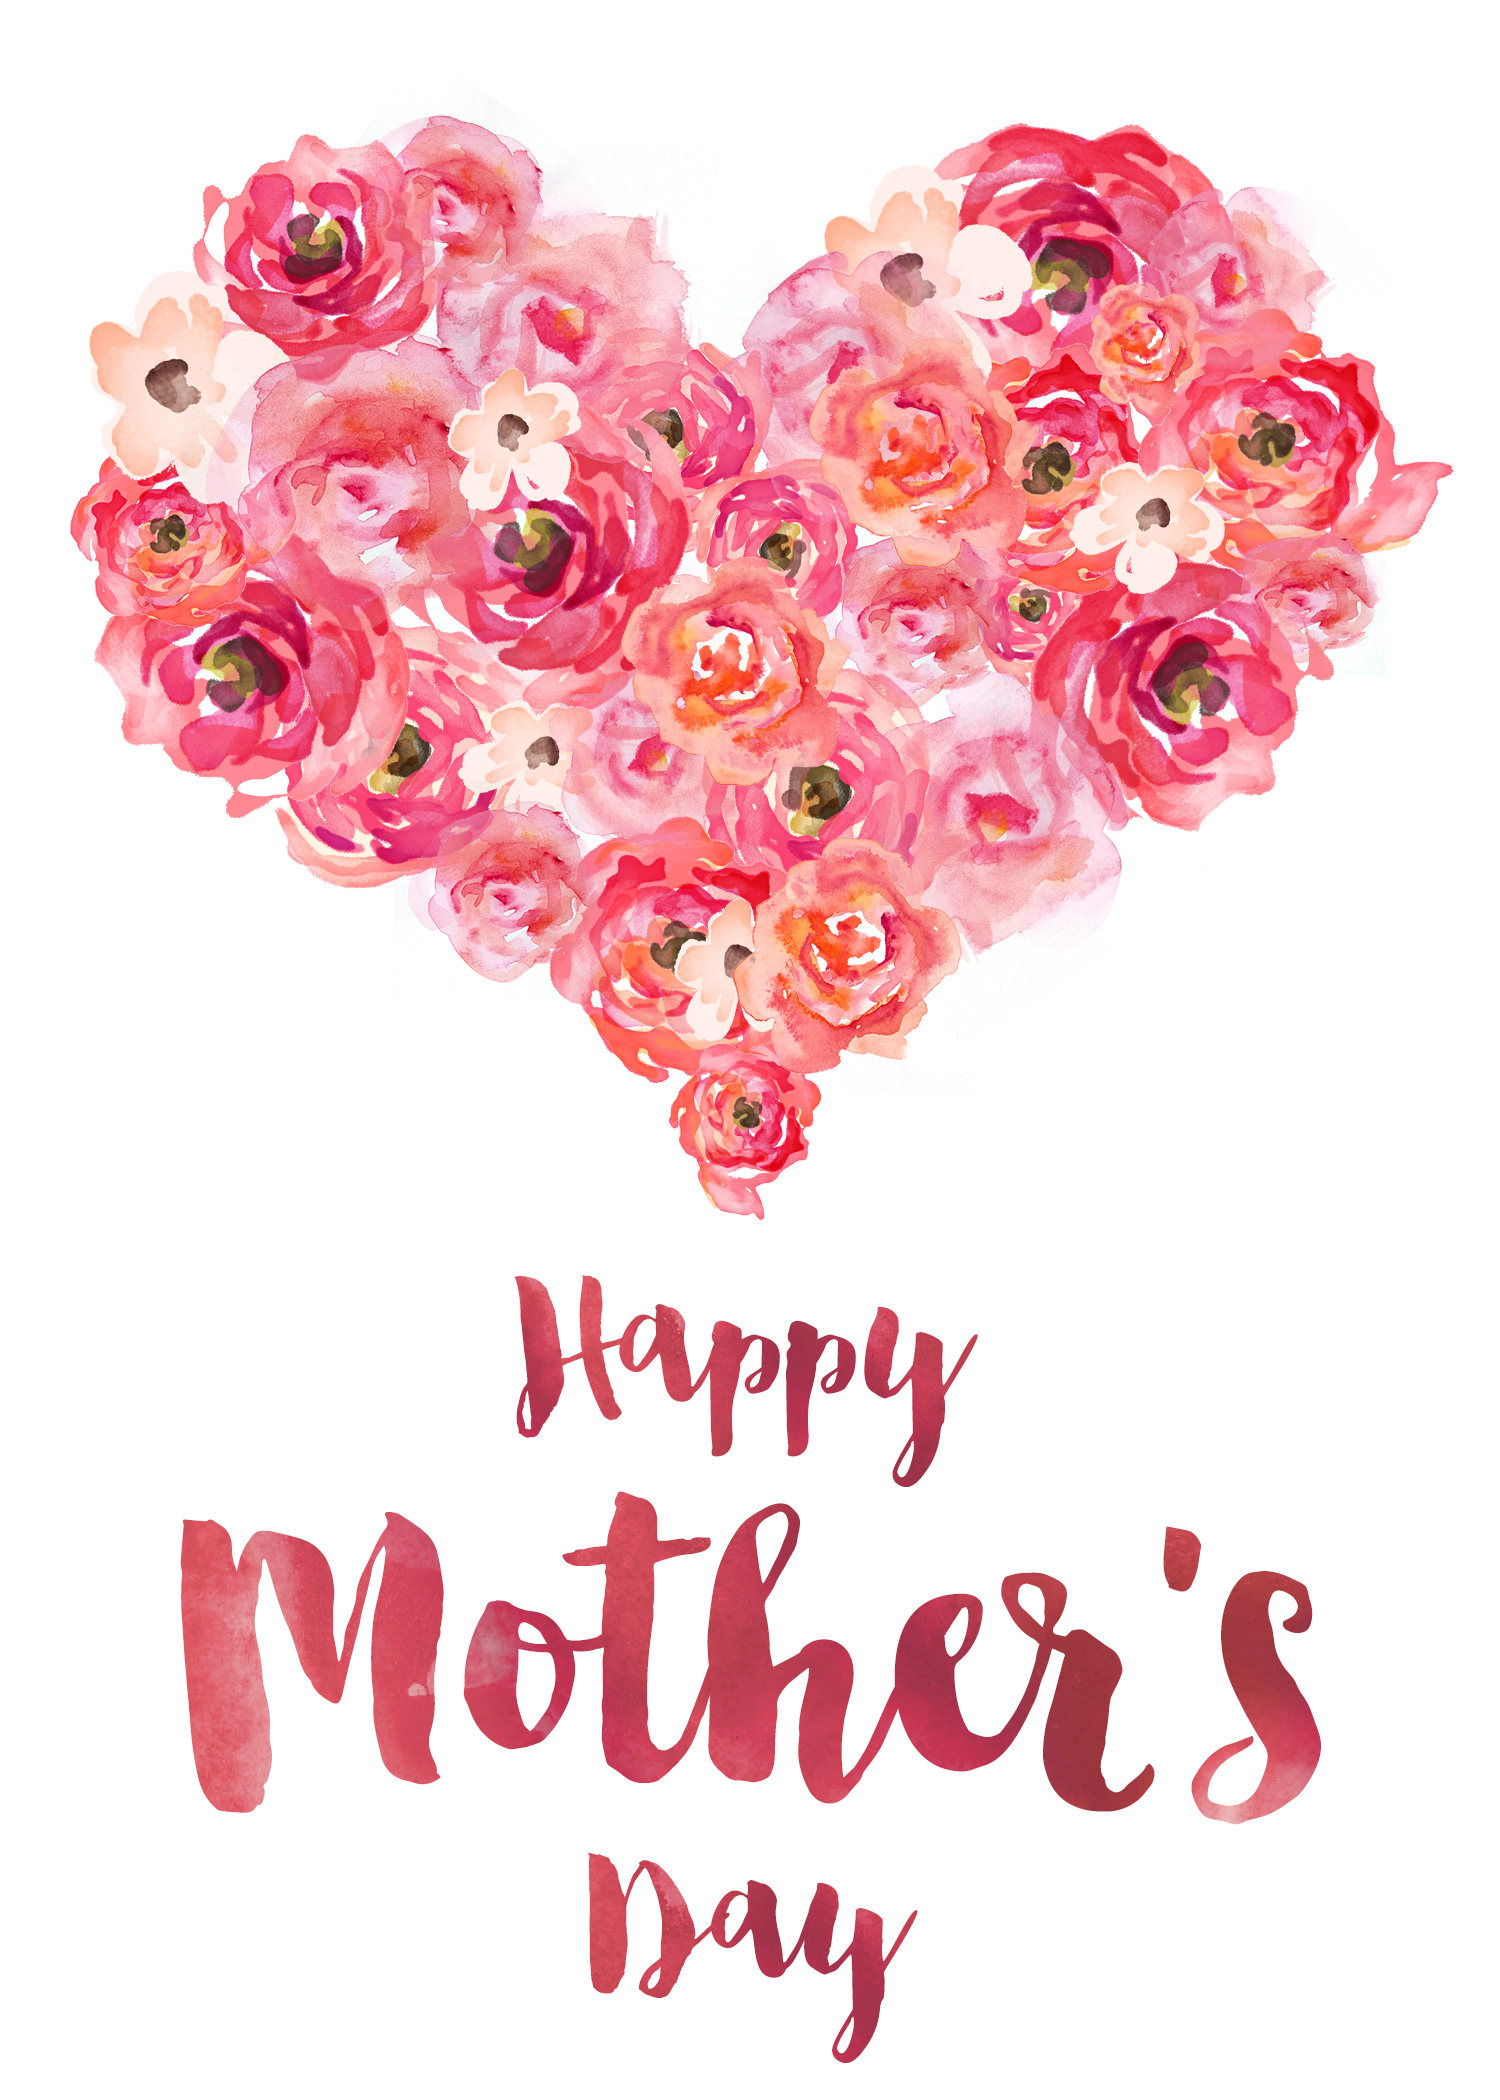 Funny^ Mothers Day Cards Ideas 2019, Templates With Messages - Free Printable Funny Mother&amp;amp;#039;s Day Cards